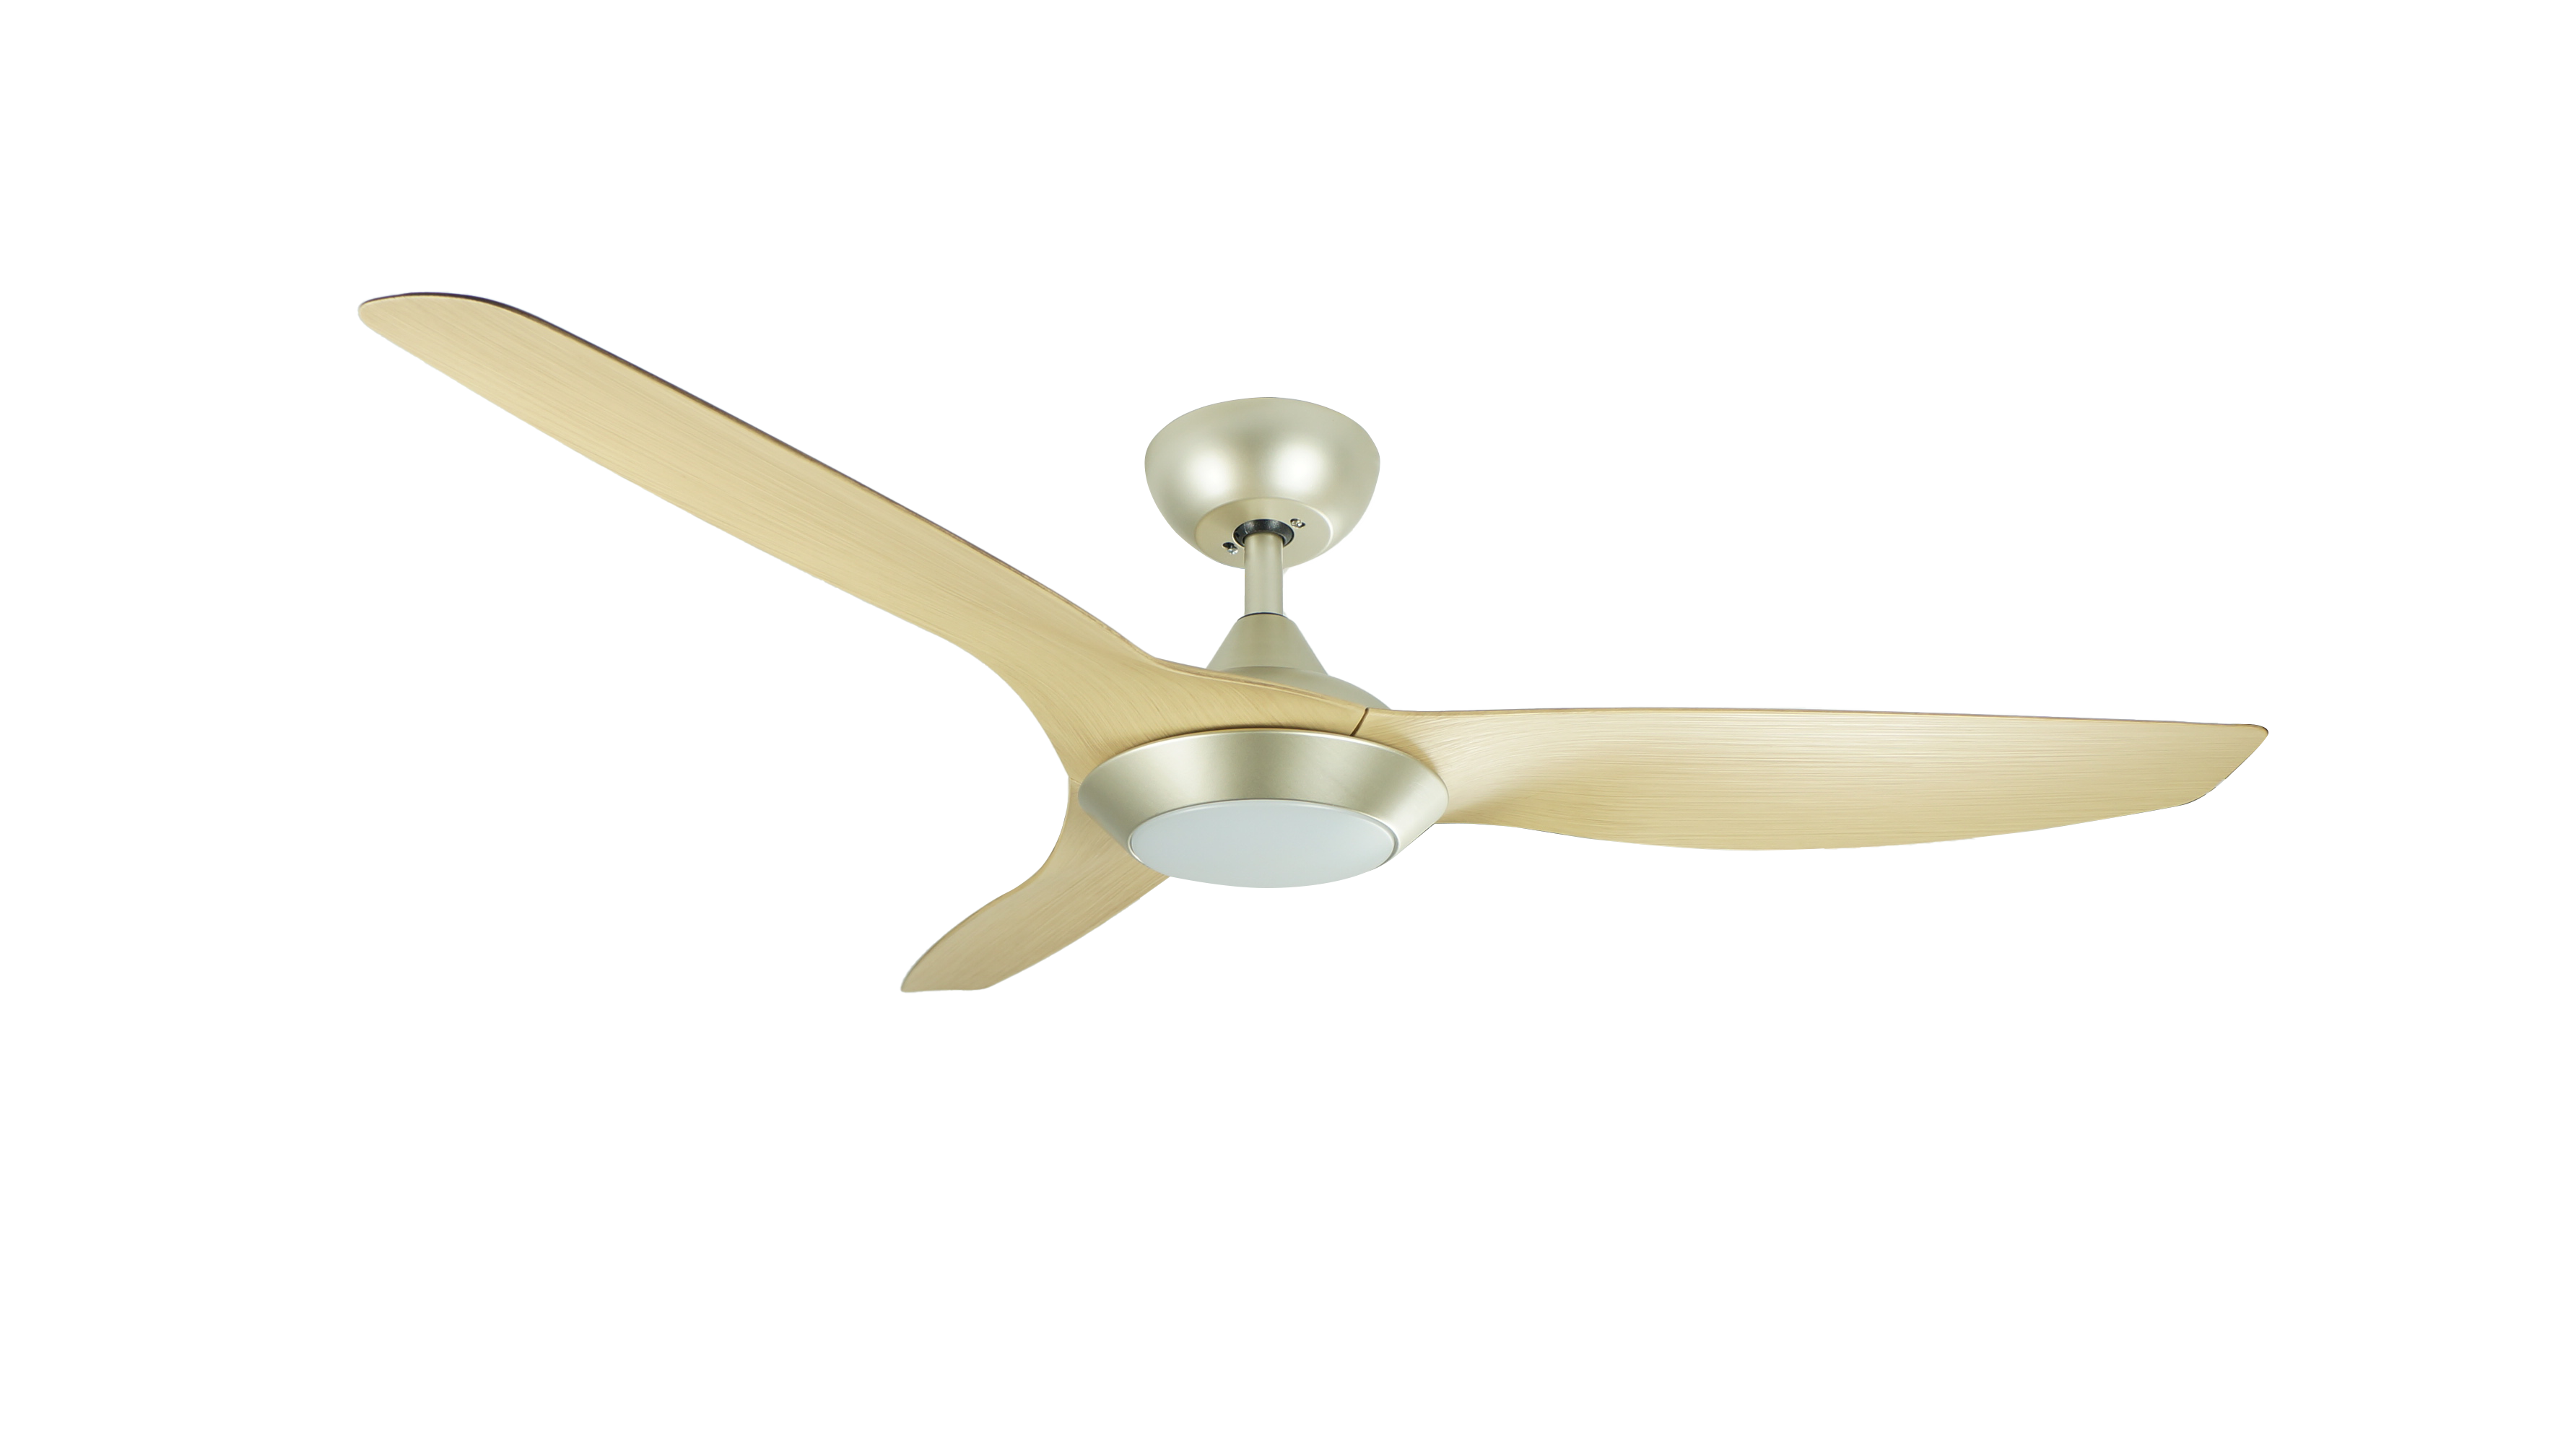 Airbena Ceiling Fan 52 Inch ABS Fan Blade with And without Light for Household Ceiling Fans Color Golden/white/black